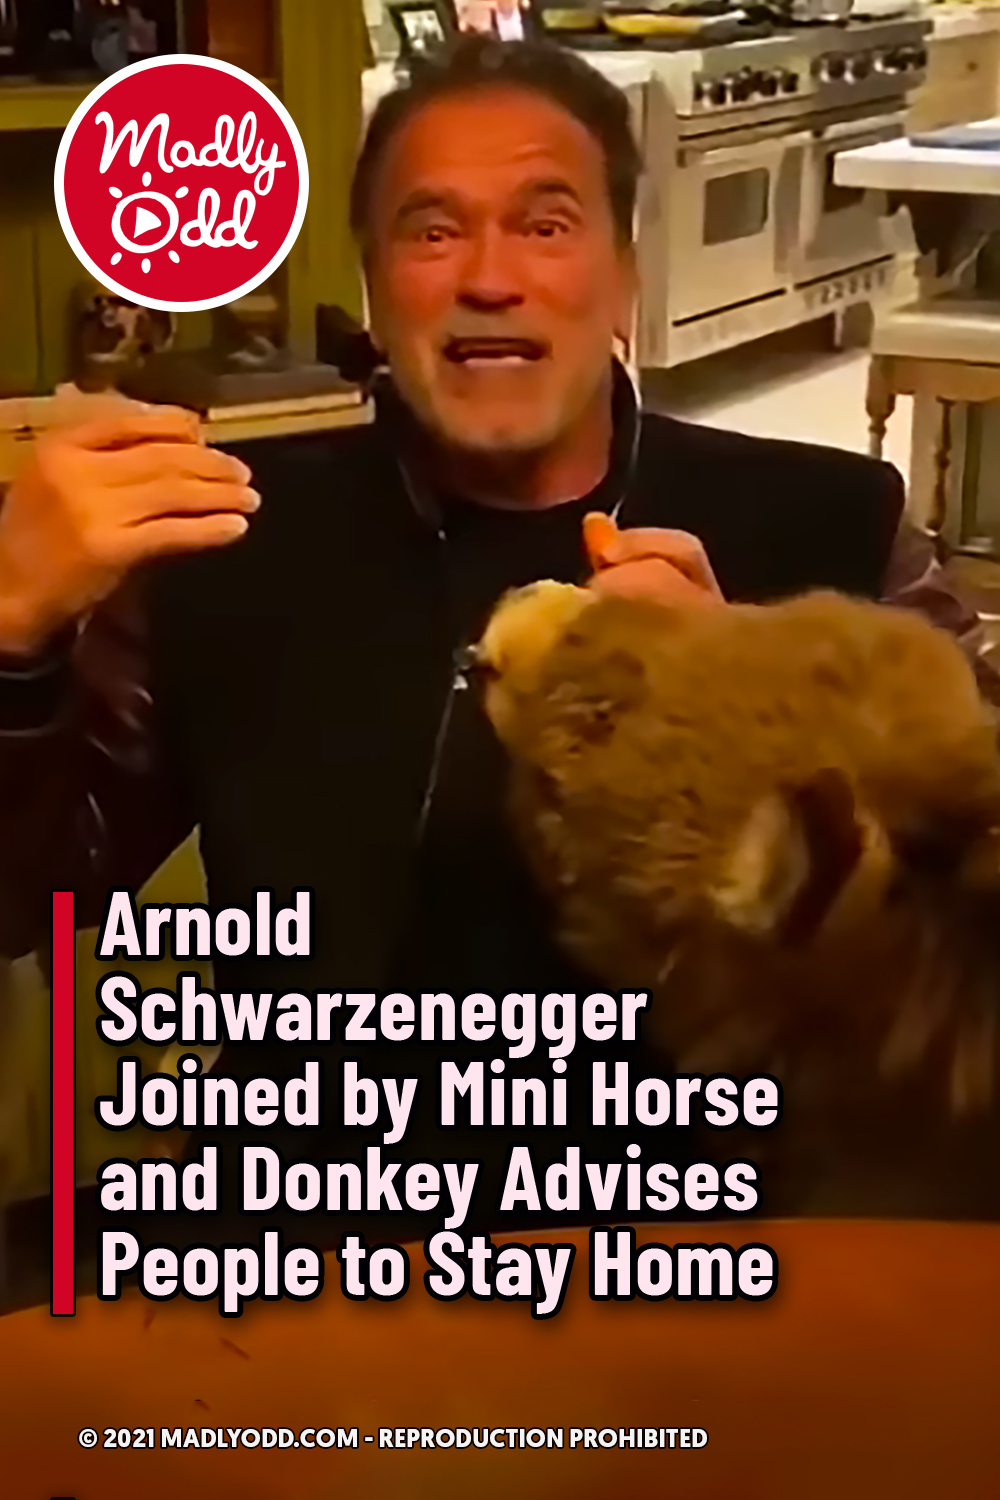 Arnold Schwarzenegger Joined by Mini Horse and Donkey Advises People to Stay Home